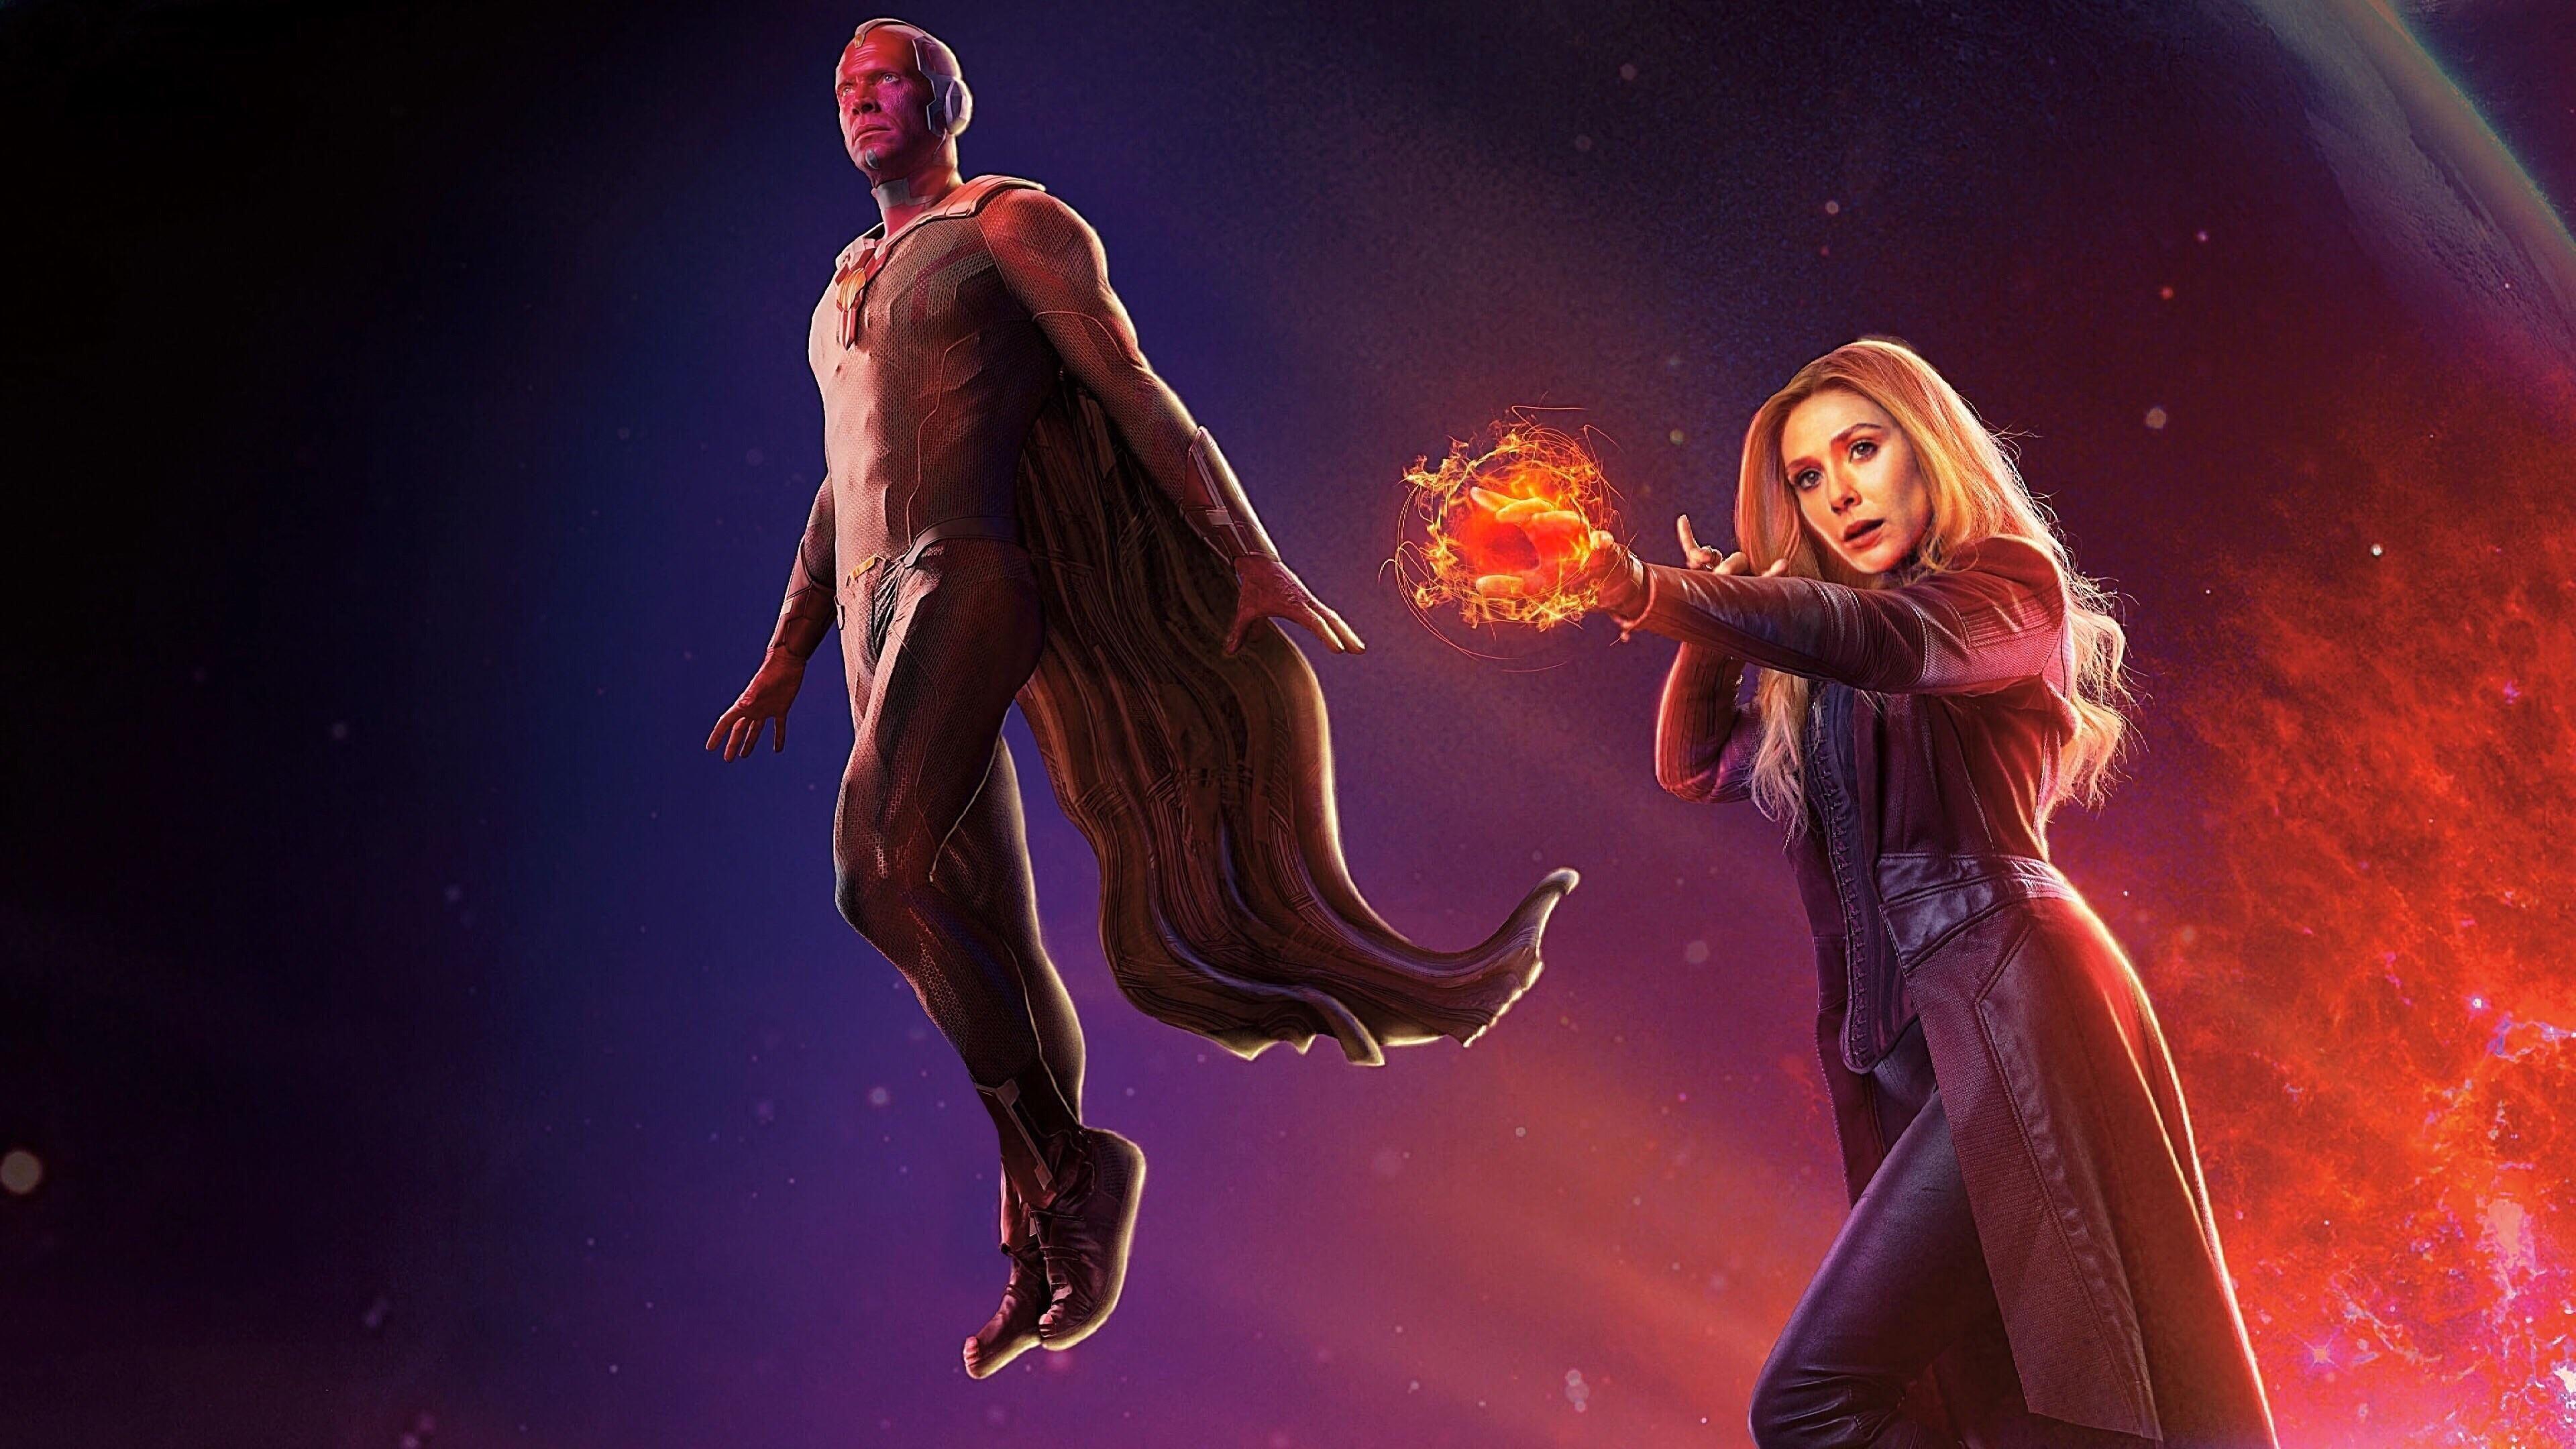 Avengers Infinity War Scarlet Witch and Vision 4k wallpaper